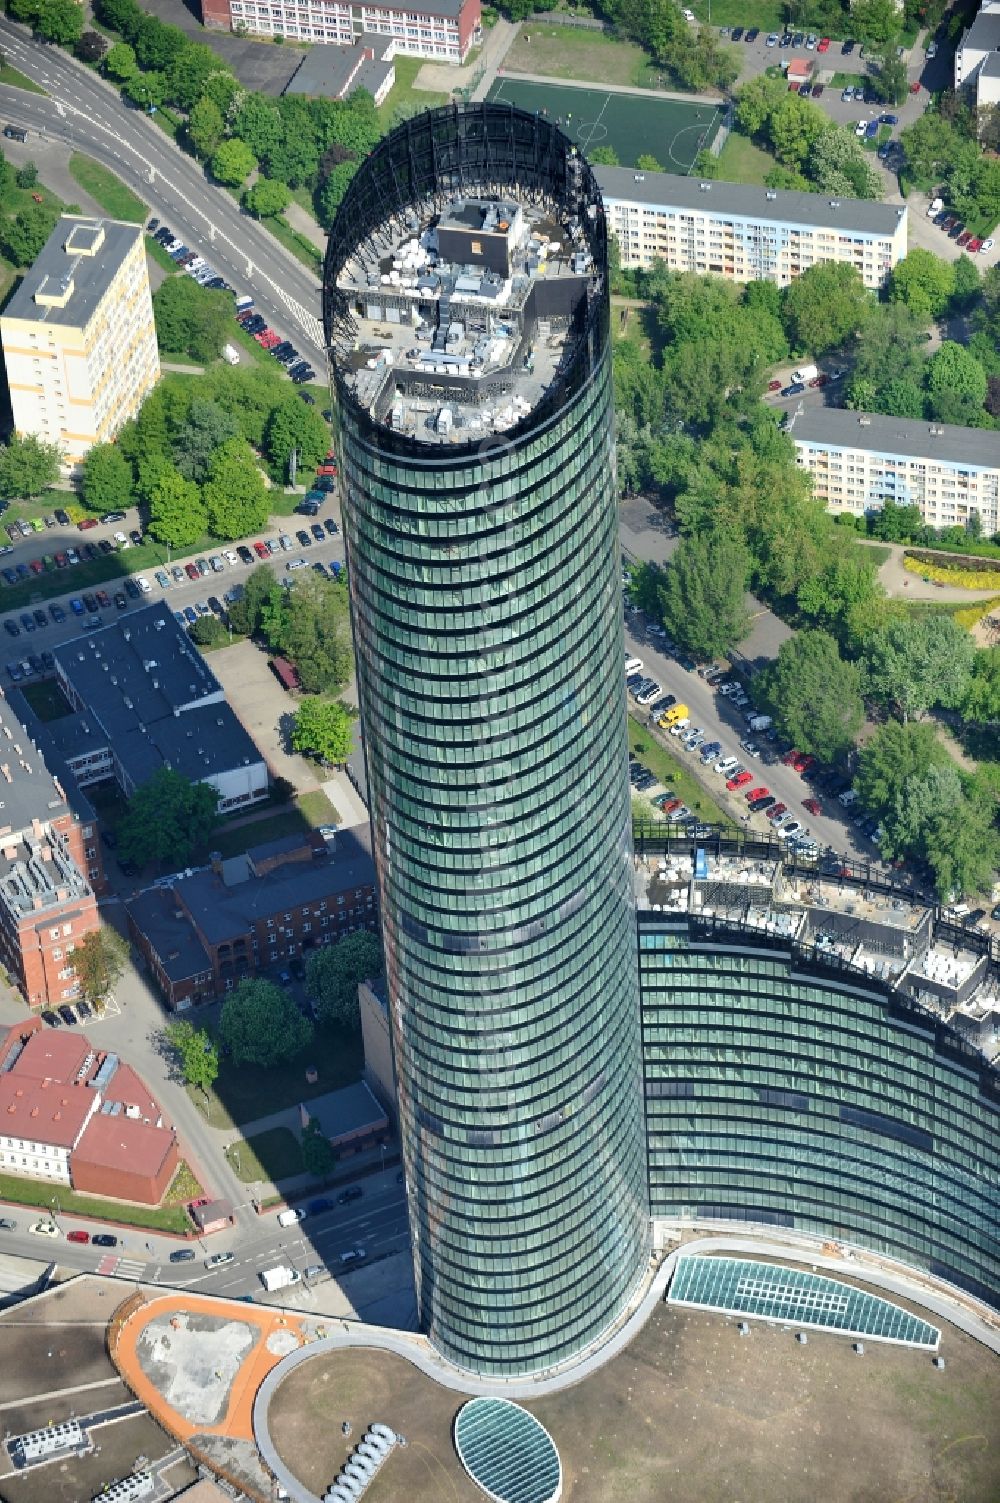 Wroclaw / Breslau from above - The newly constructed high-rise sky tower in Wroclaw / Breslau. The modern residential and commercial building is 260 meters, the tallest building in Poland. Architect is Dariusz Dziubi?ski Studio Archiektoniczne FOLD s.c